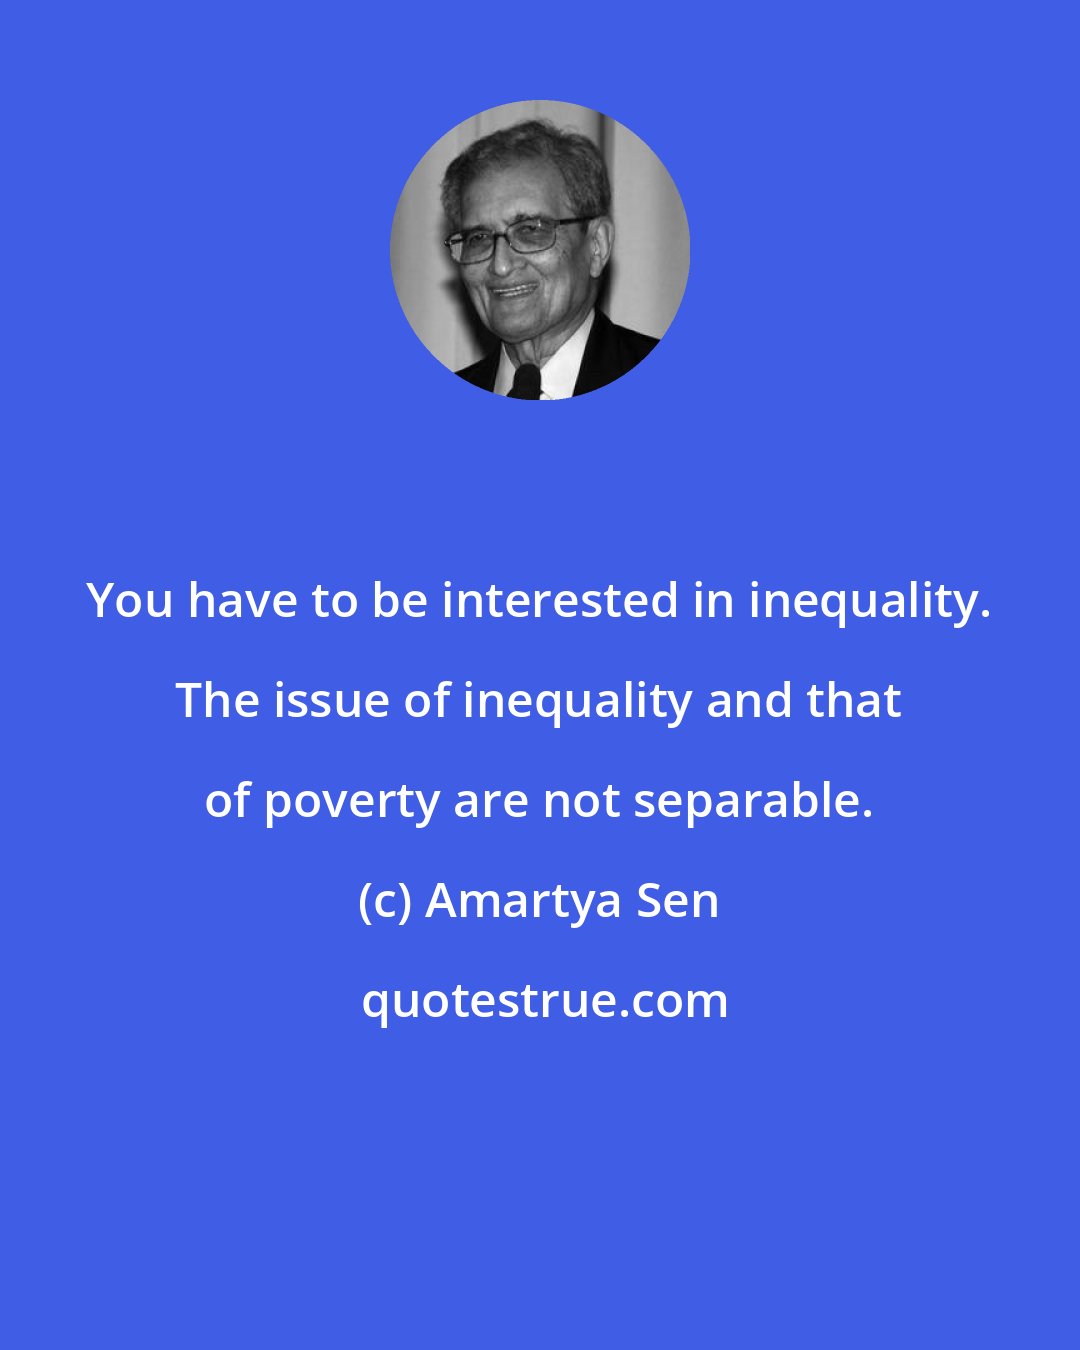 Amartya Sen: You have to be interested in inequality. The issue of inequality and that of poverty are not separable.